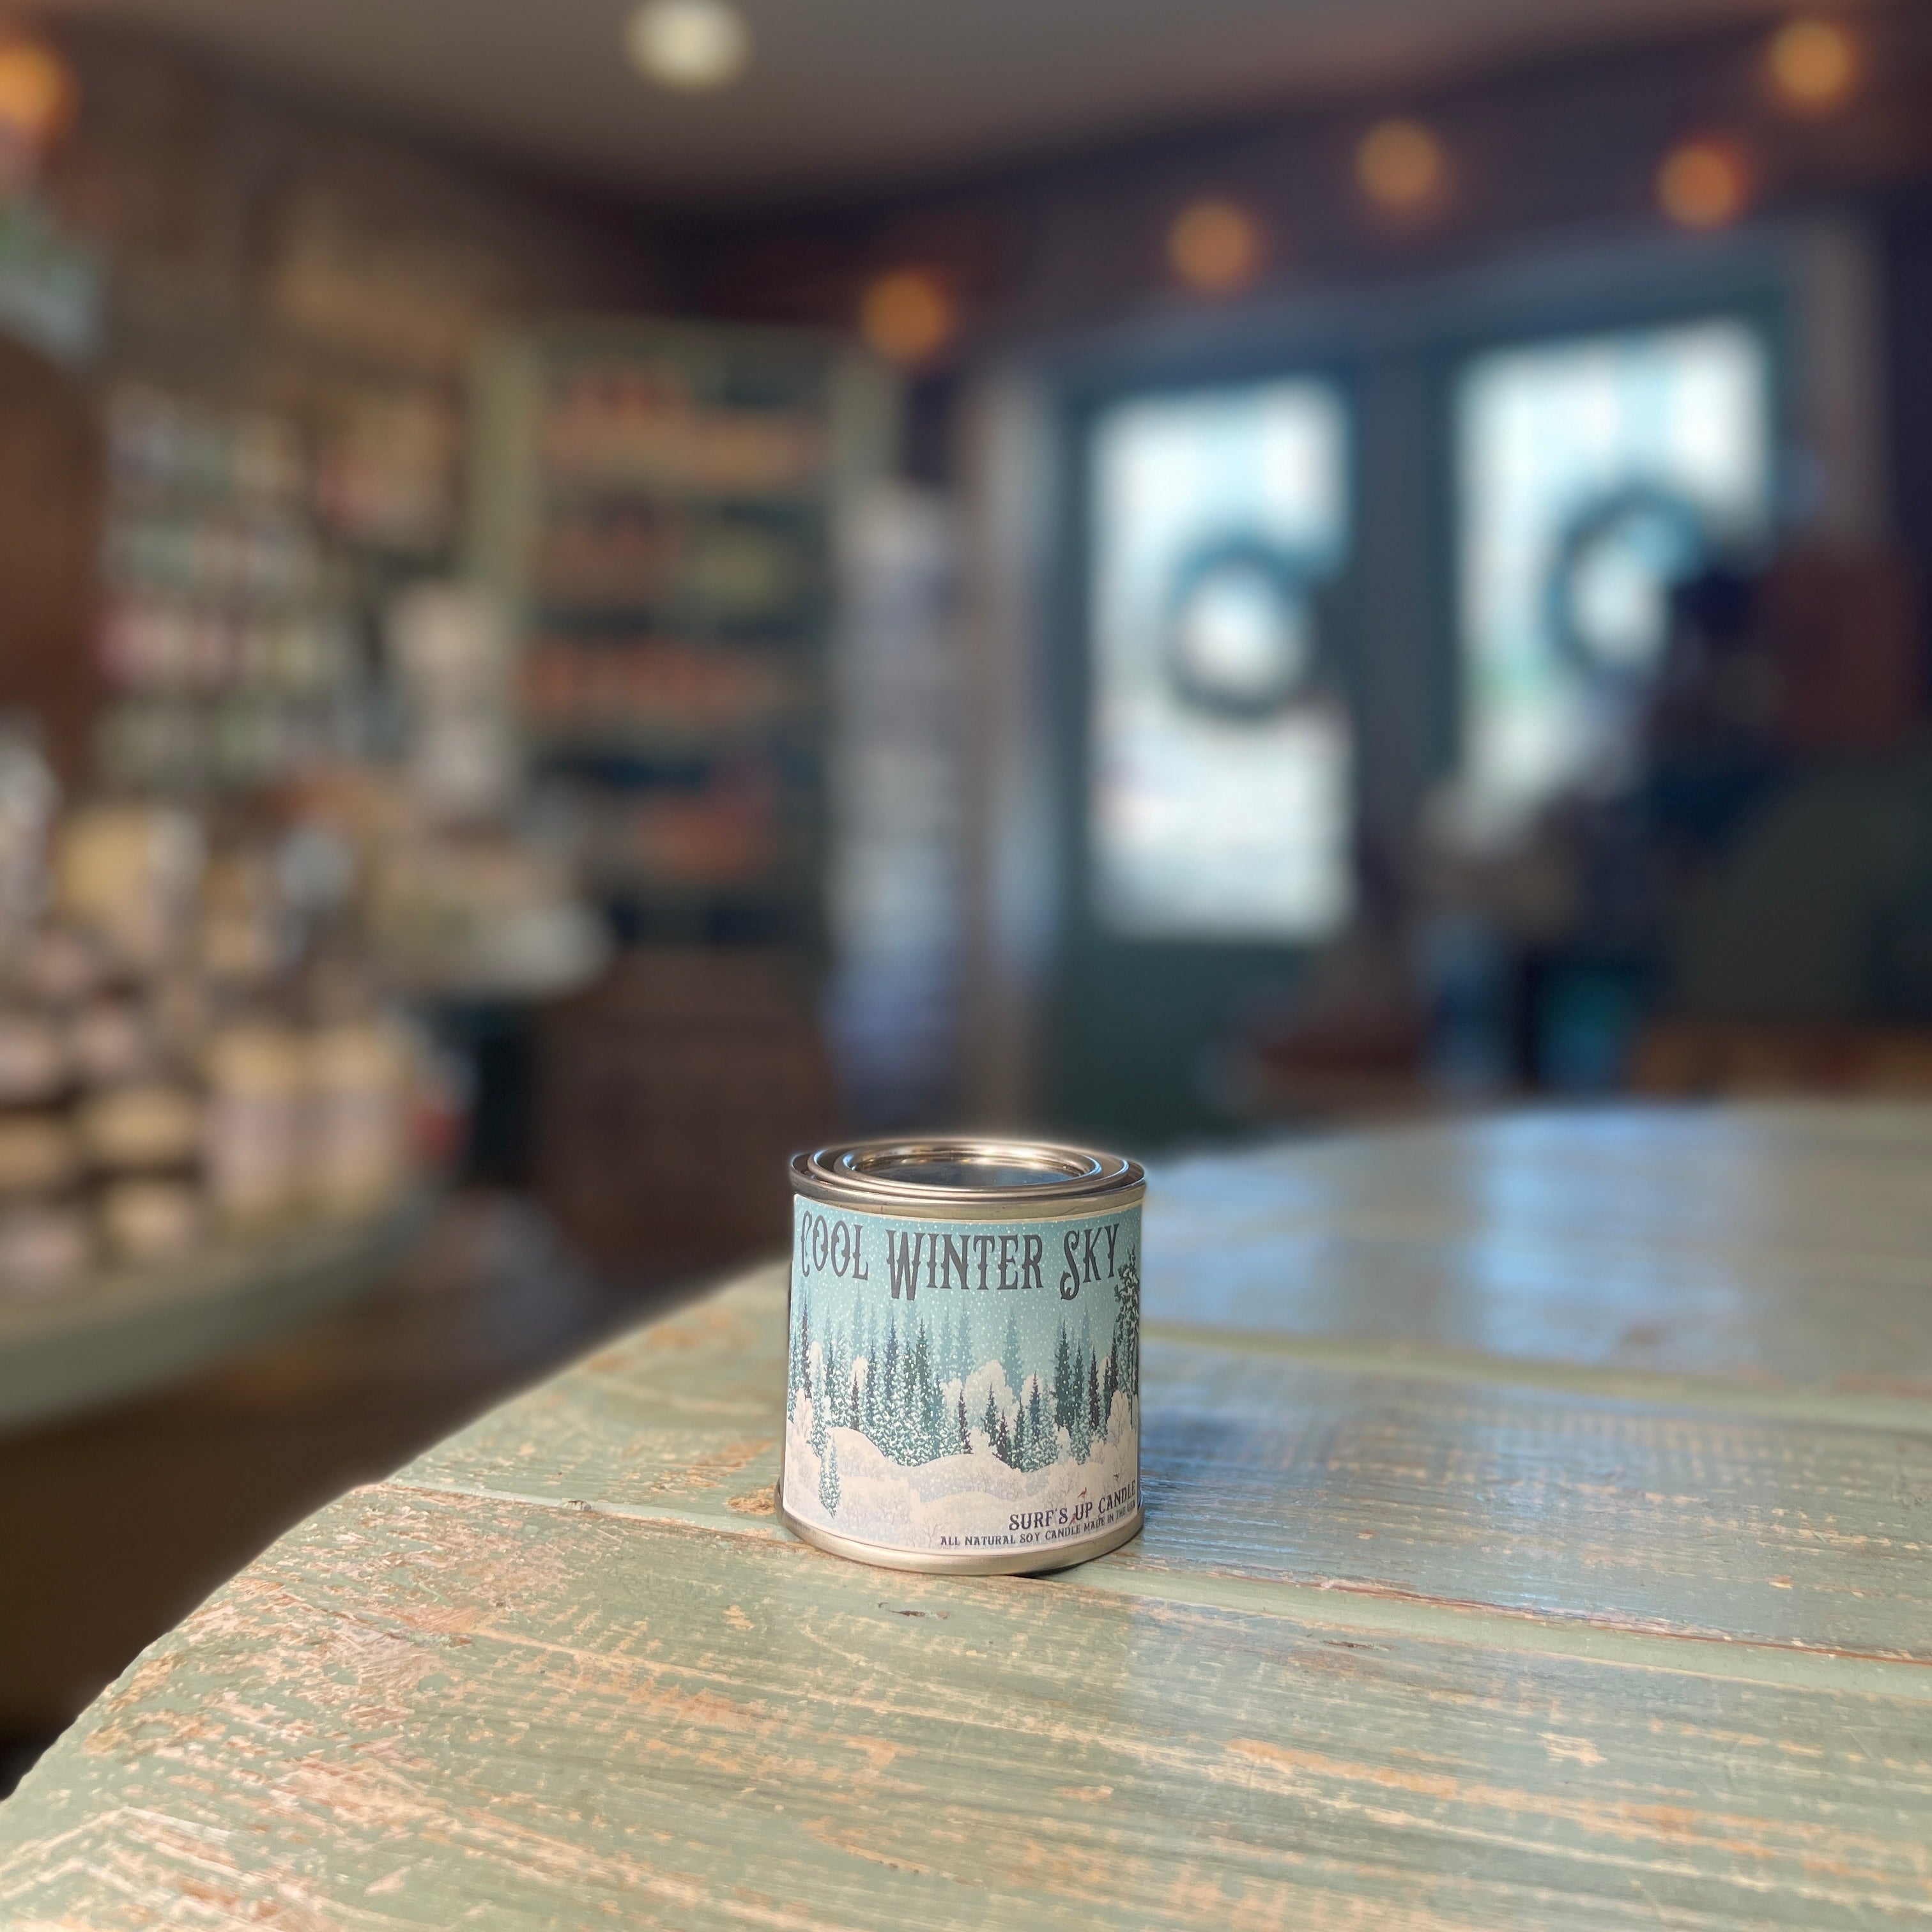 Cool Winter Sky Paint Can Candle - Vintage Collection